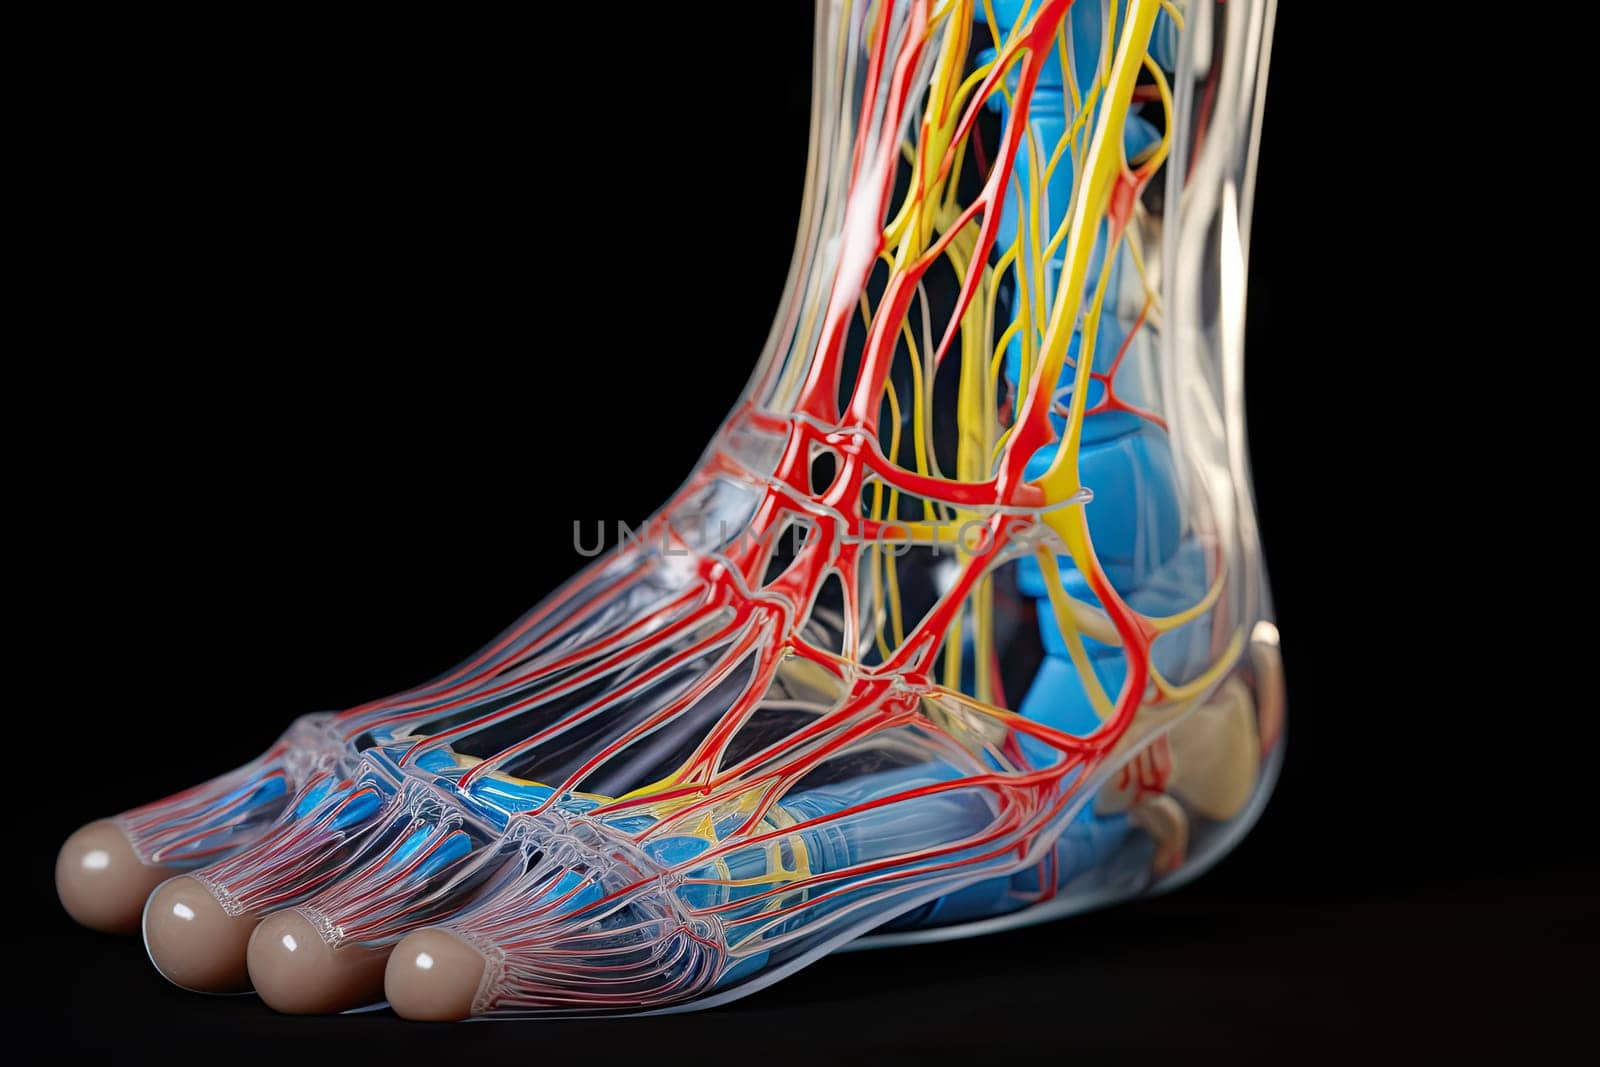 A Multicolored Diagram of the Human Foot, with Detailed Lines and Markings Created With Generative AI Technology